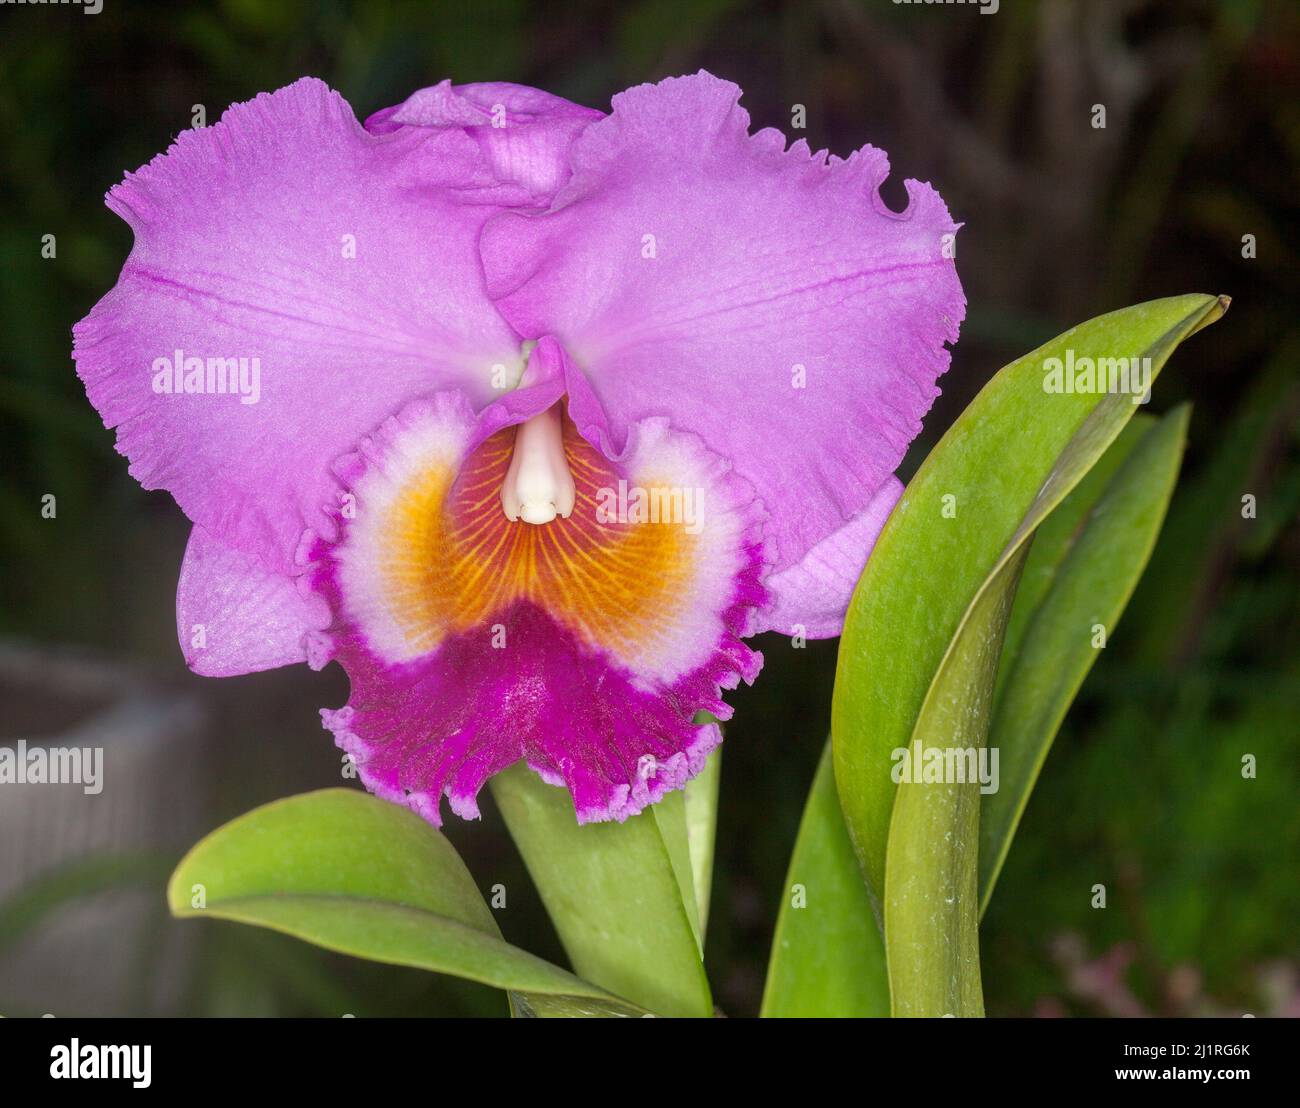 Large and spectacular pink / mauve perfumed flower and green leaves of orchid against dark green background Stock Photo